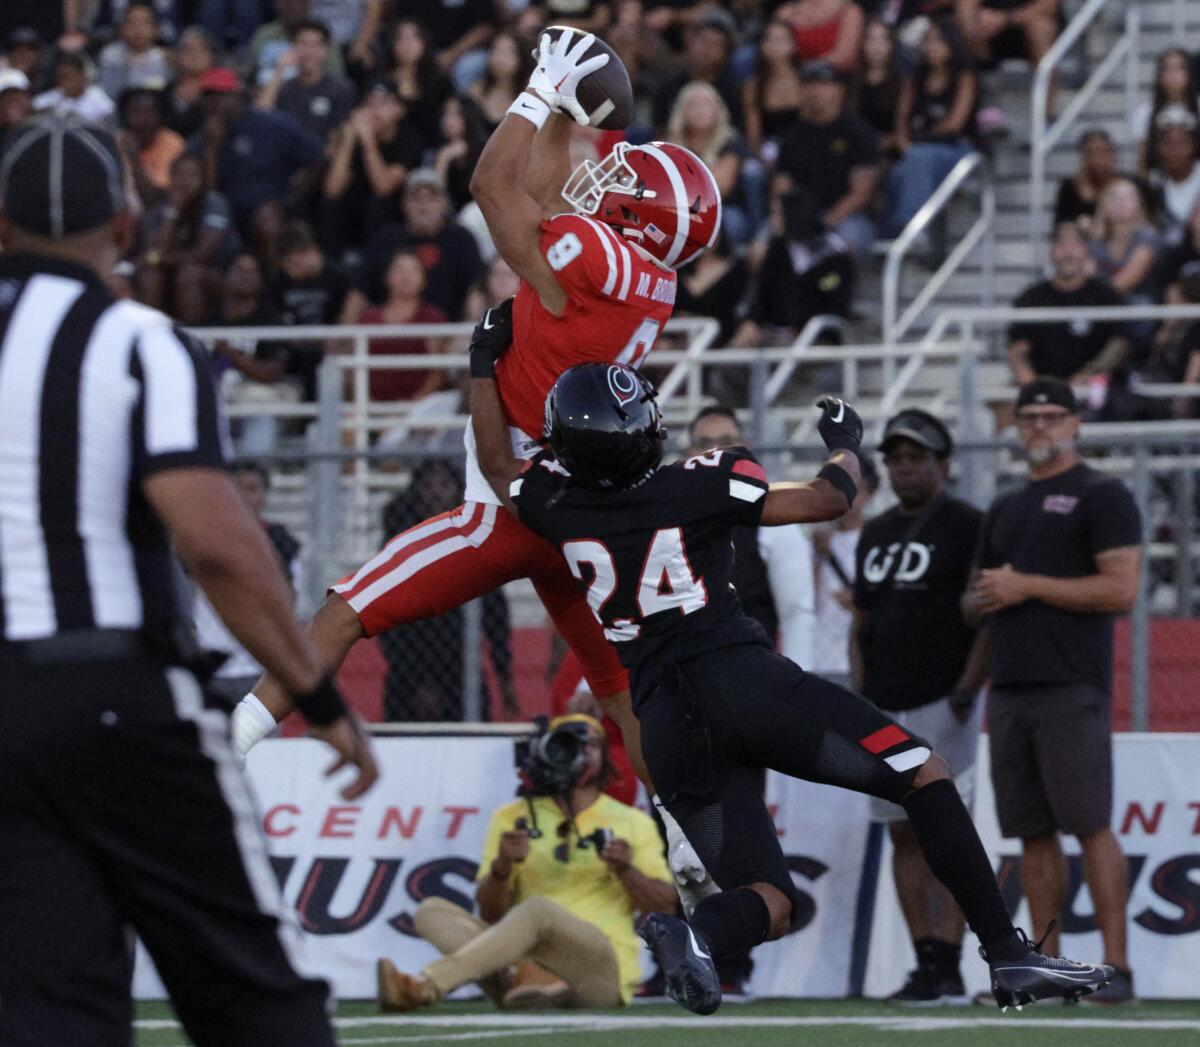 Mater Dei wide receiver Marcus Brown leaps above Corona Centennial defender Charles Castille for the game's first touchdown.